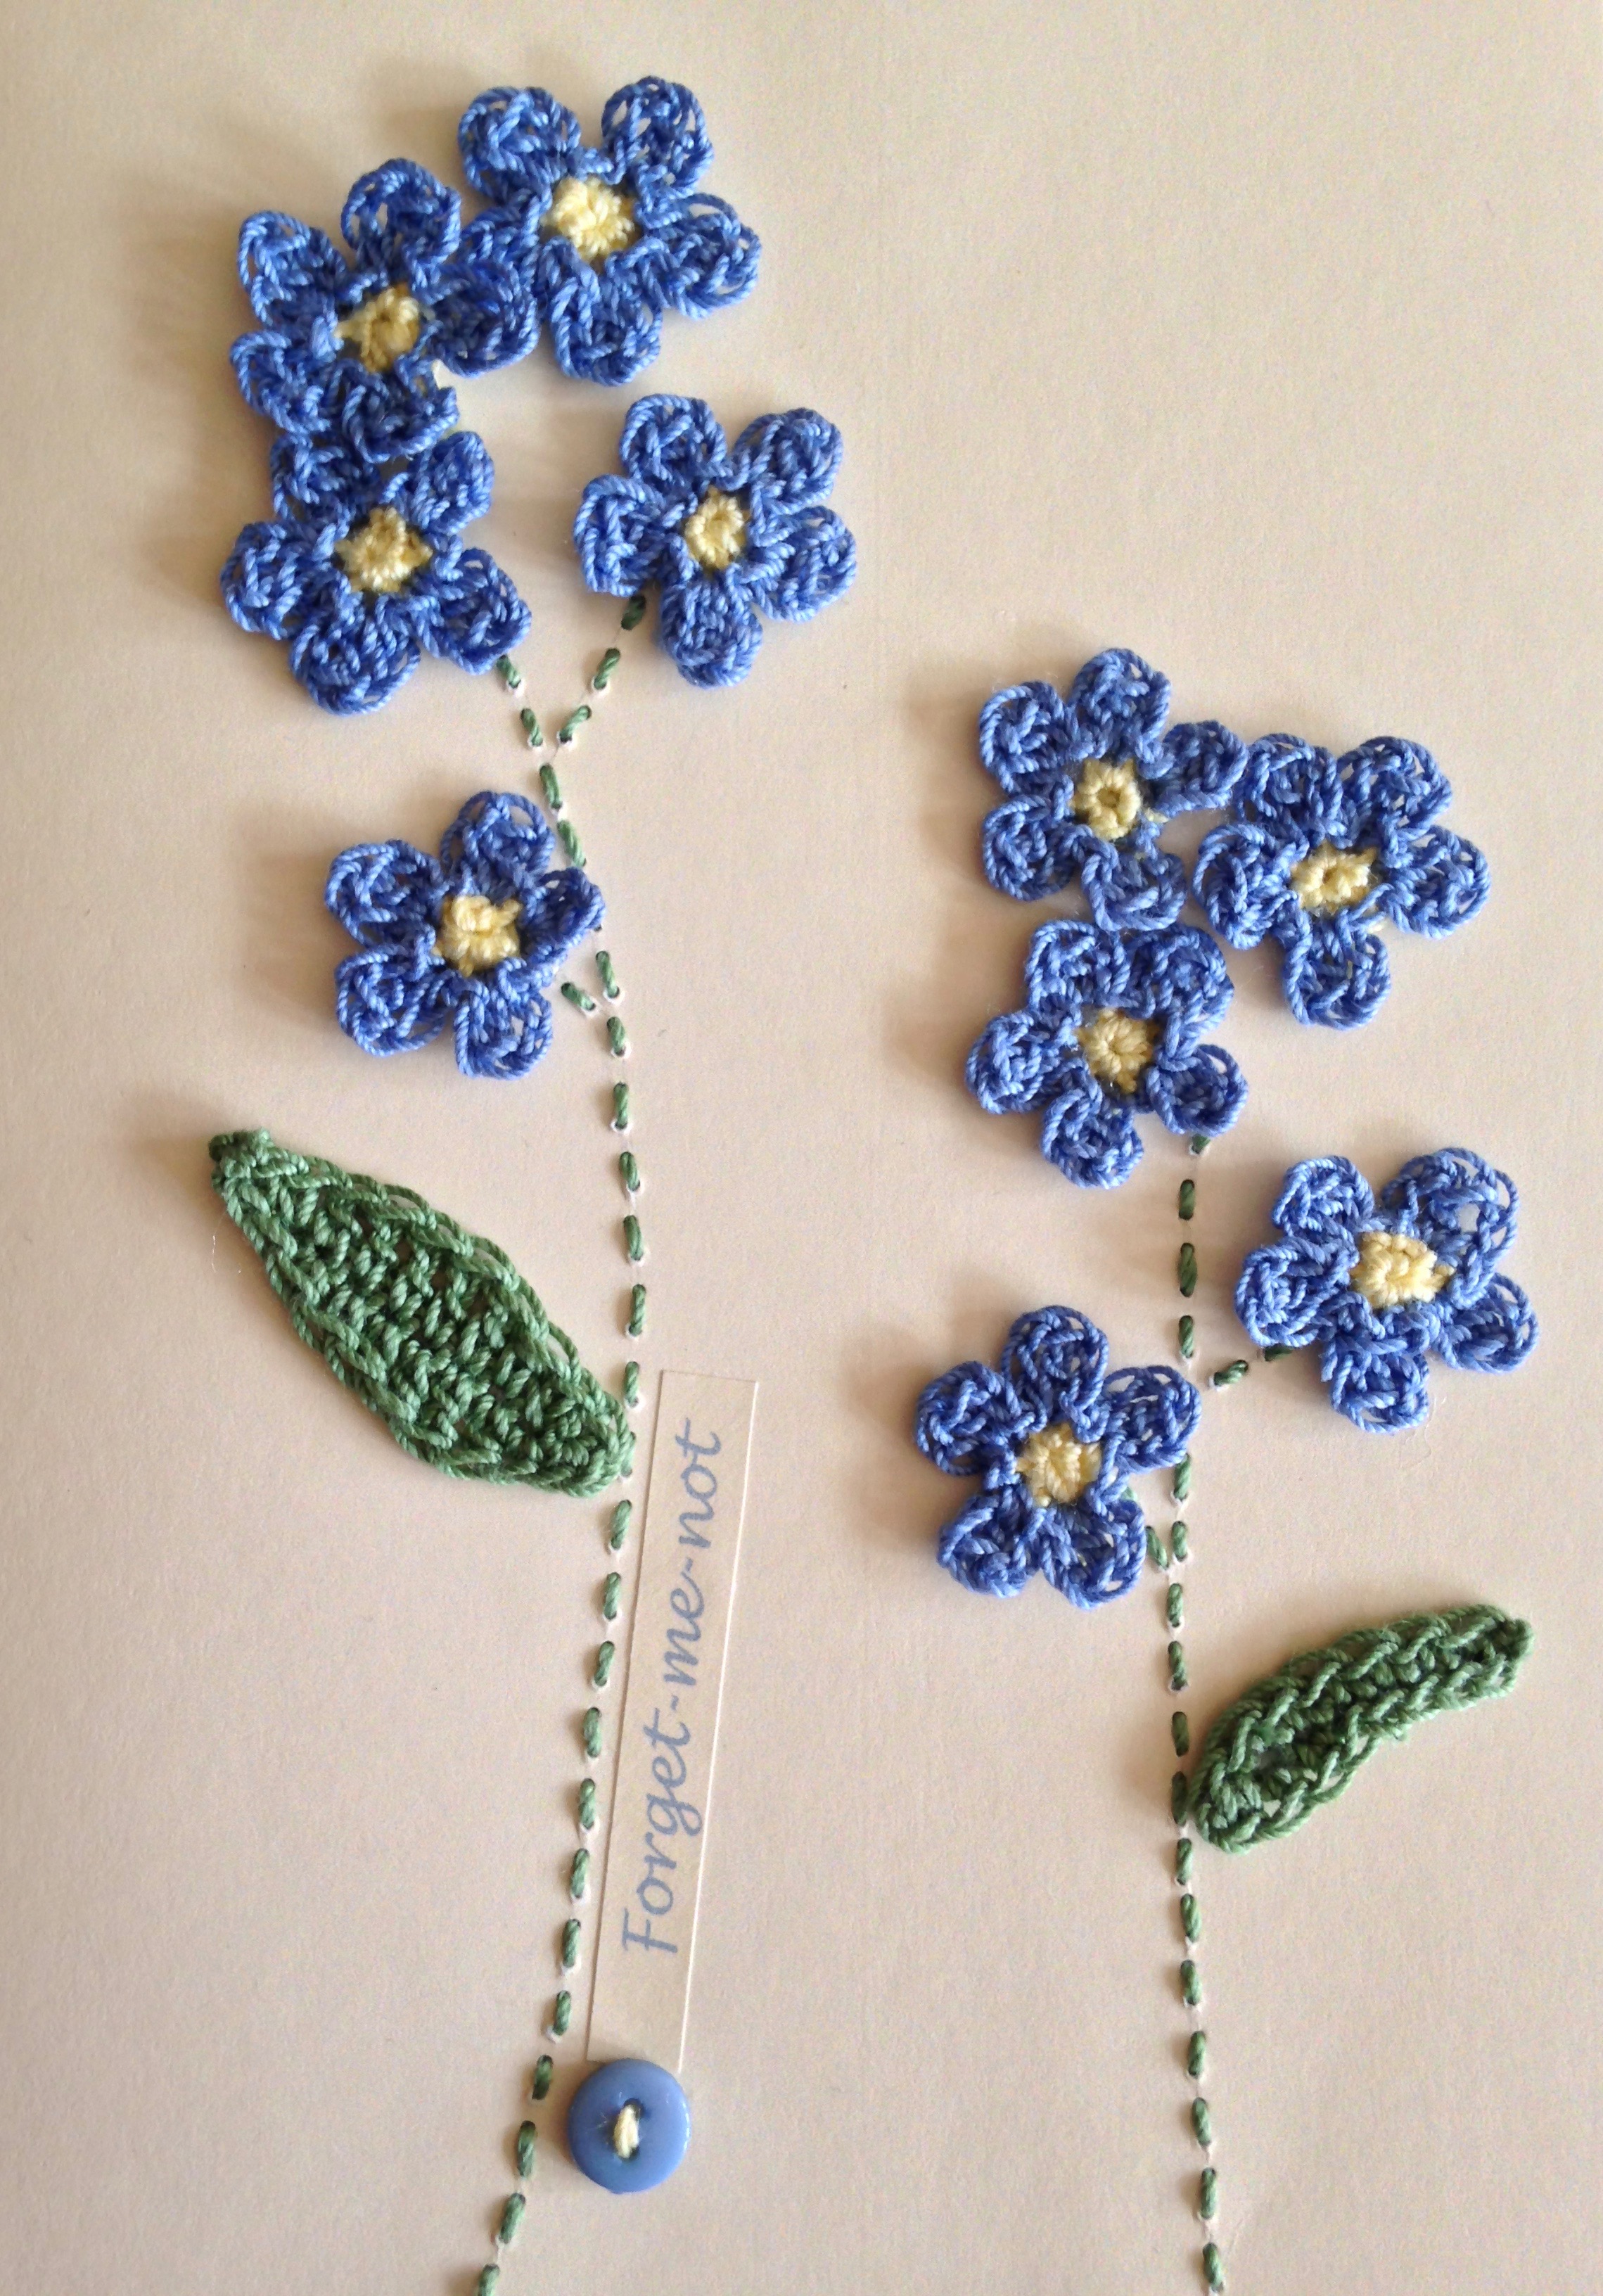 A hand stitched and crocheted greetings card with pale blue Forget-me-not flowers and green leaves.